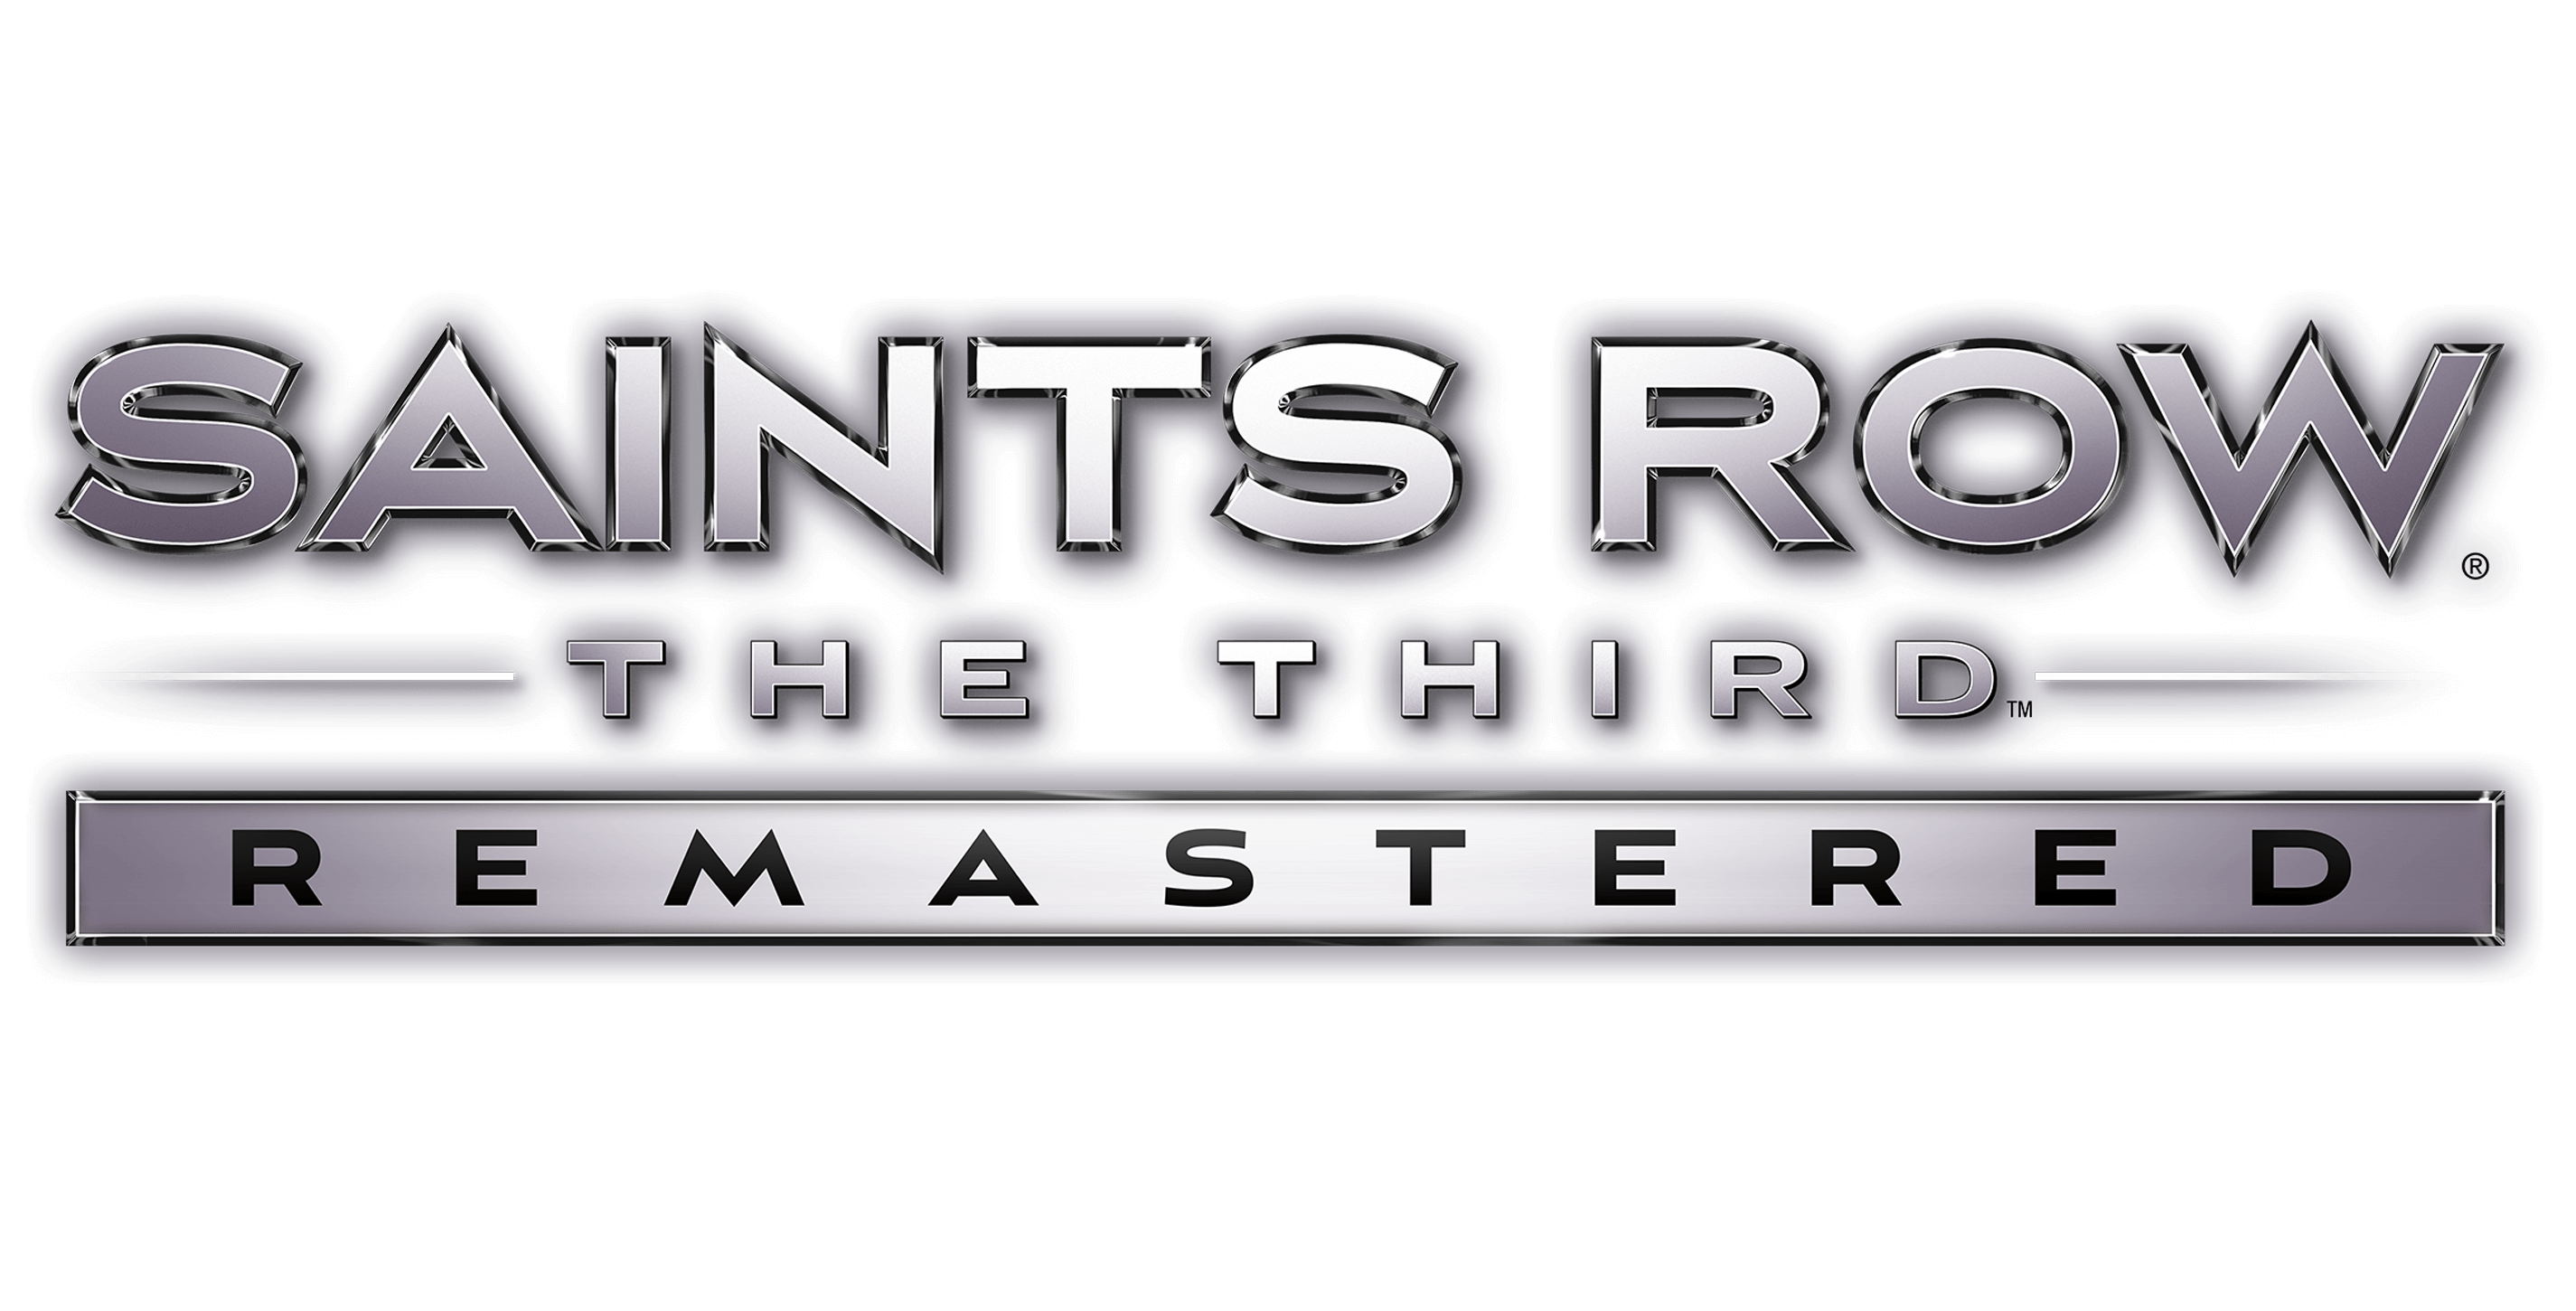 Saints Row: The Third Remastered - Announcement